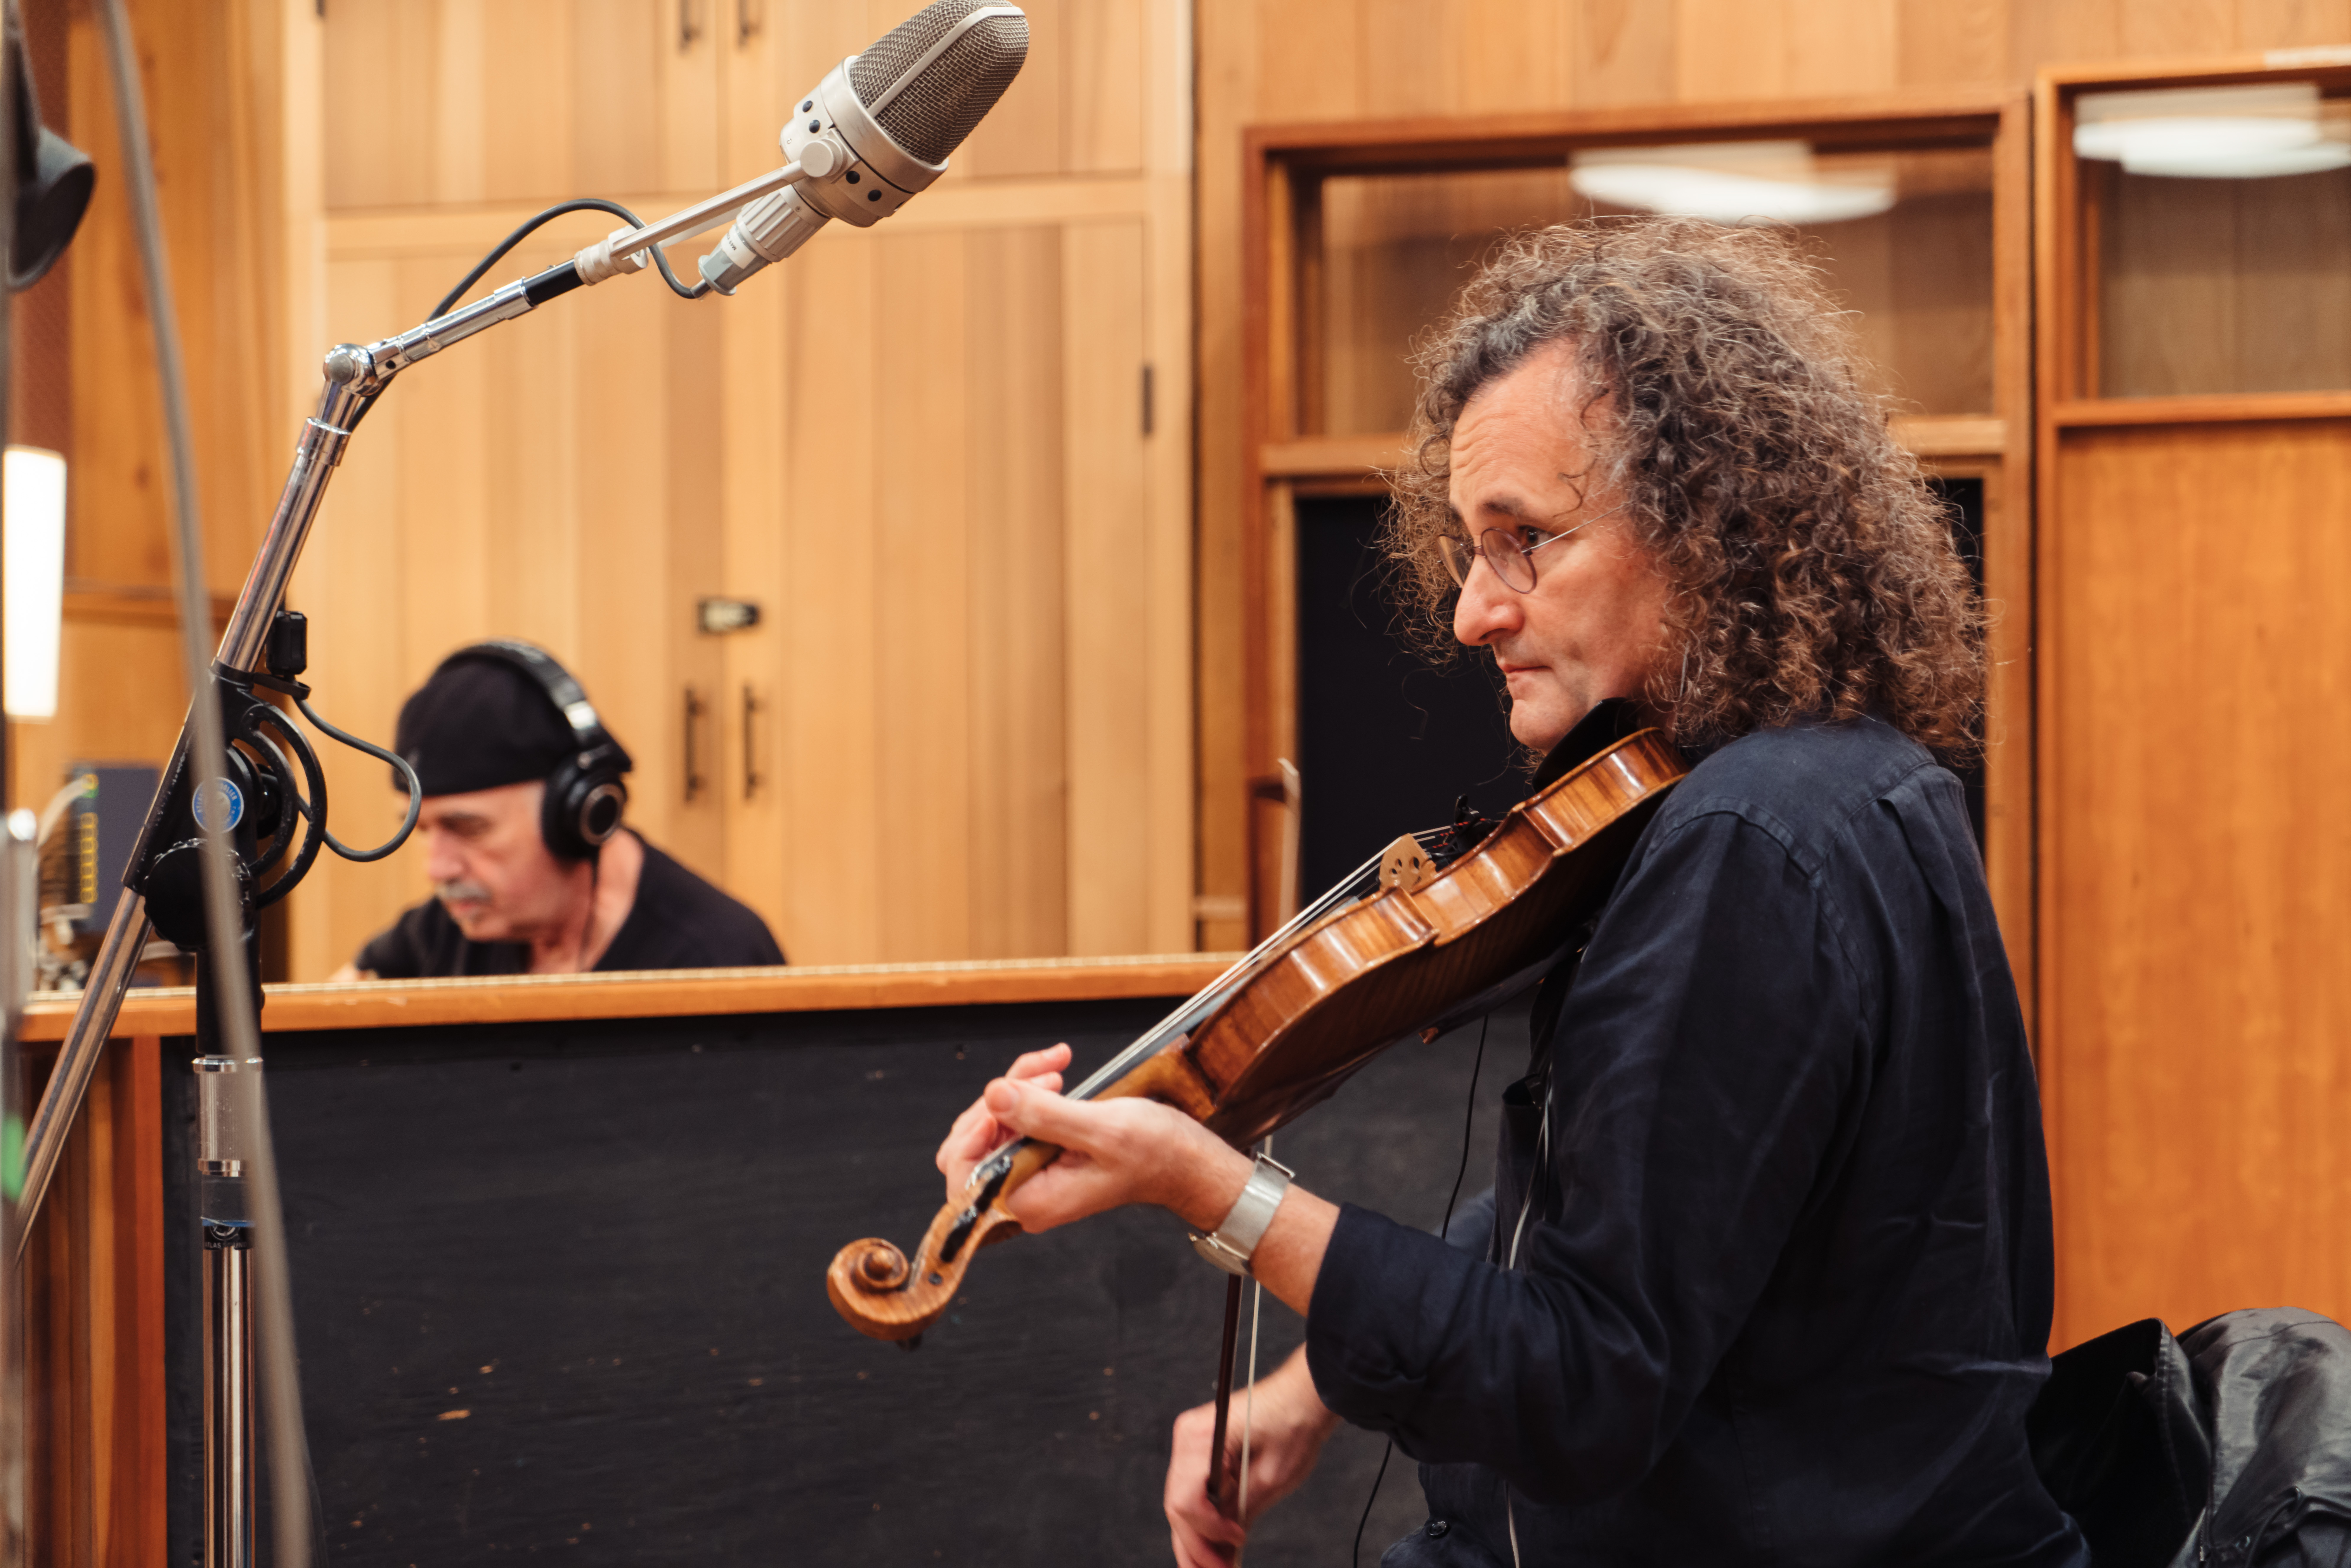 The Gloaming 3 - Recording at Reservoir Studios